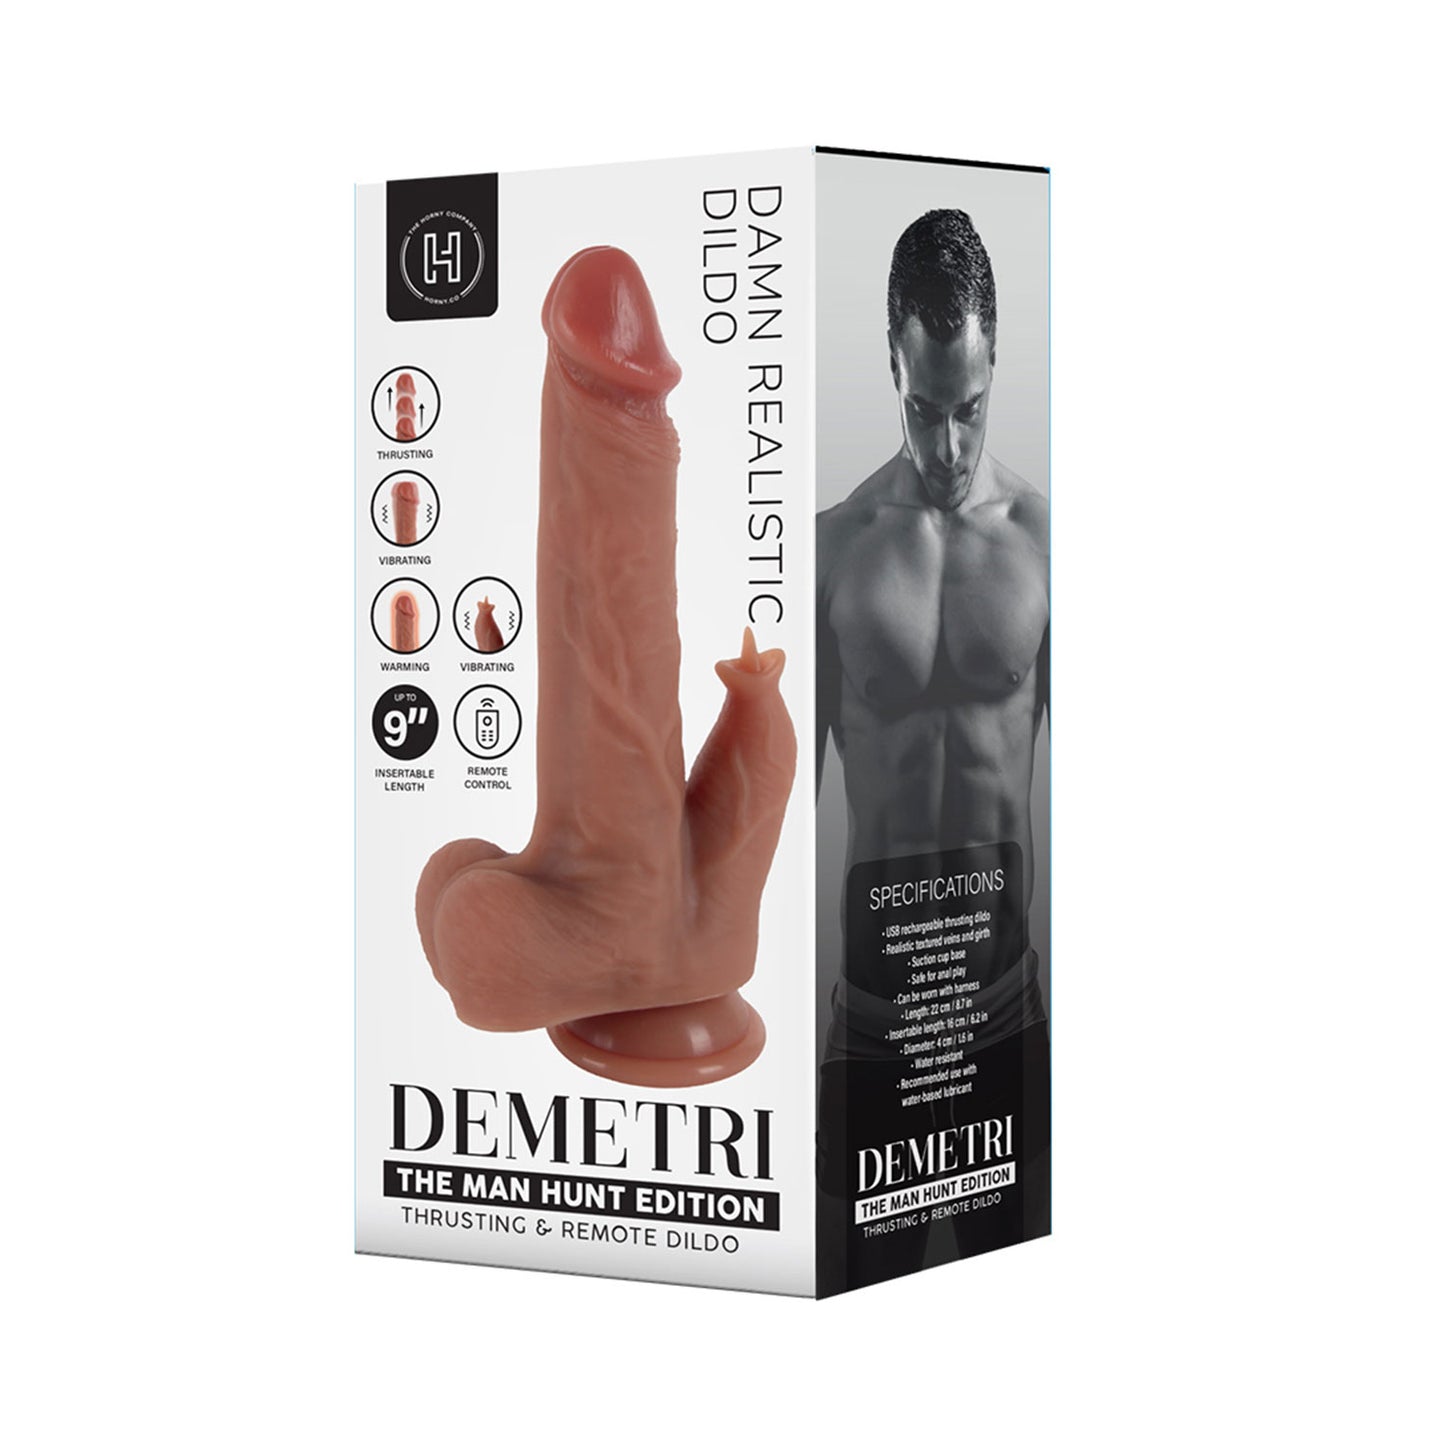 The Horny Company - Damn Realistic Dildo Man Hunt Edition Demetri Remote Controlled Thrusting Silicone Dong